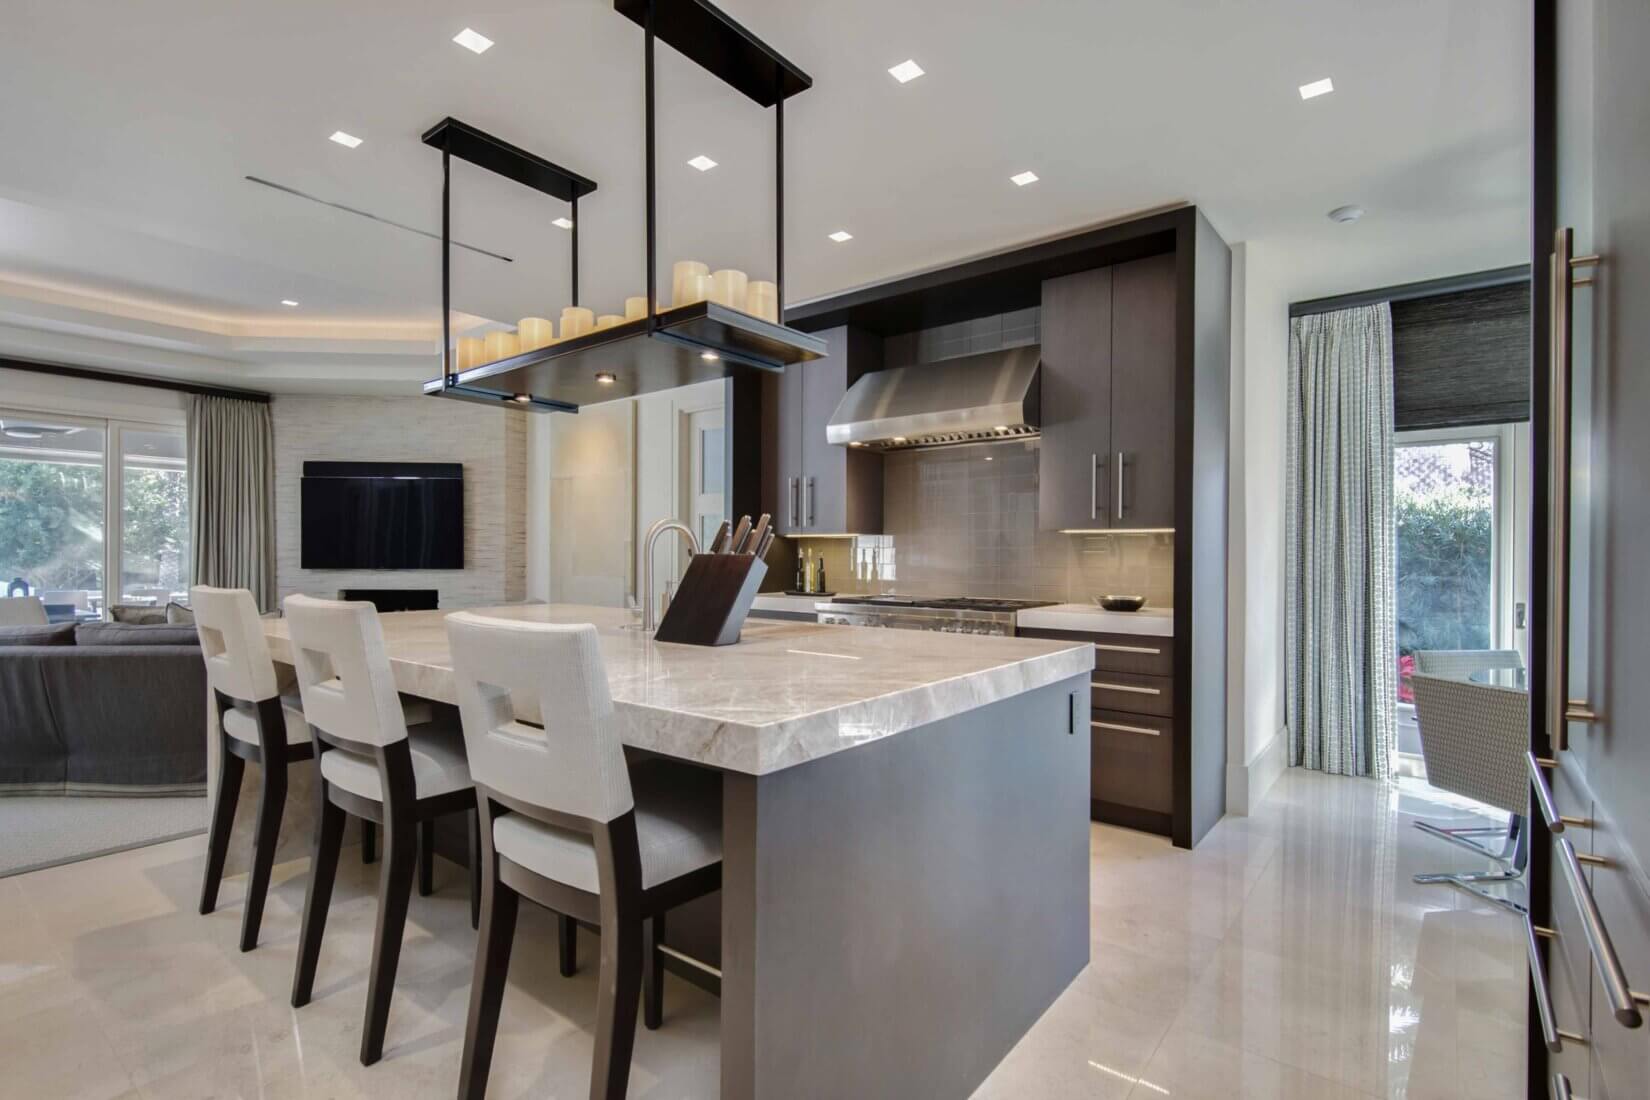 Luxury kitchen and dining space with dark-wood cabinetry and white marble counters